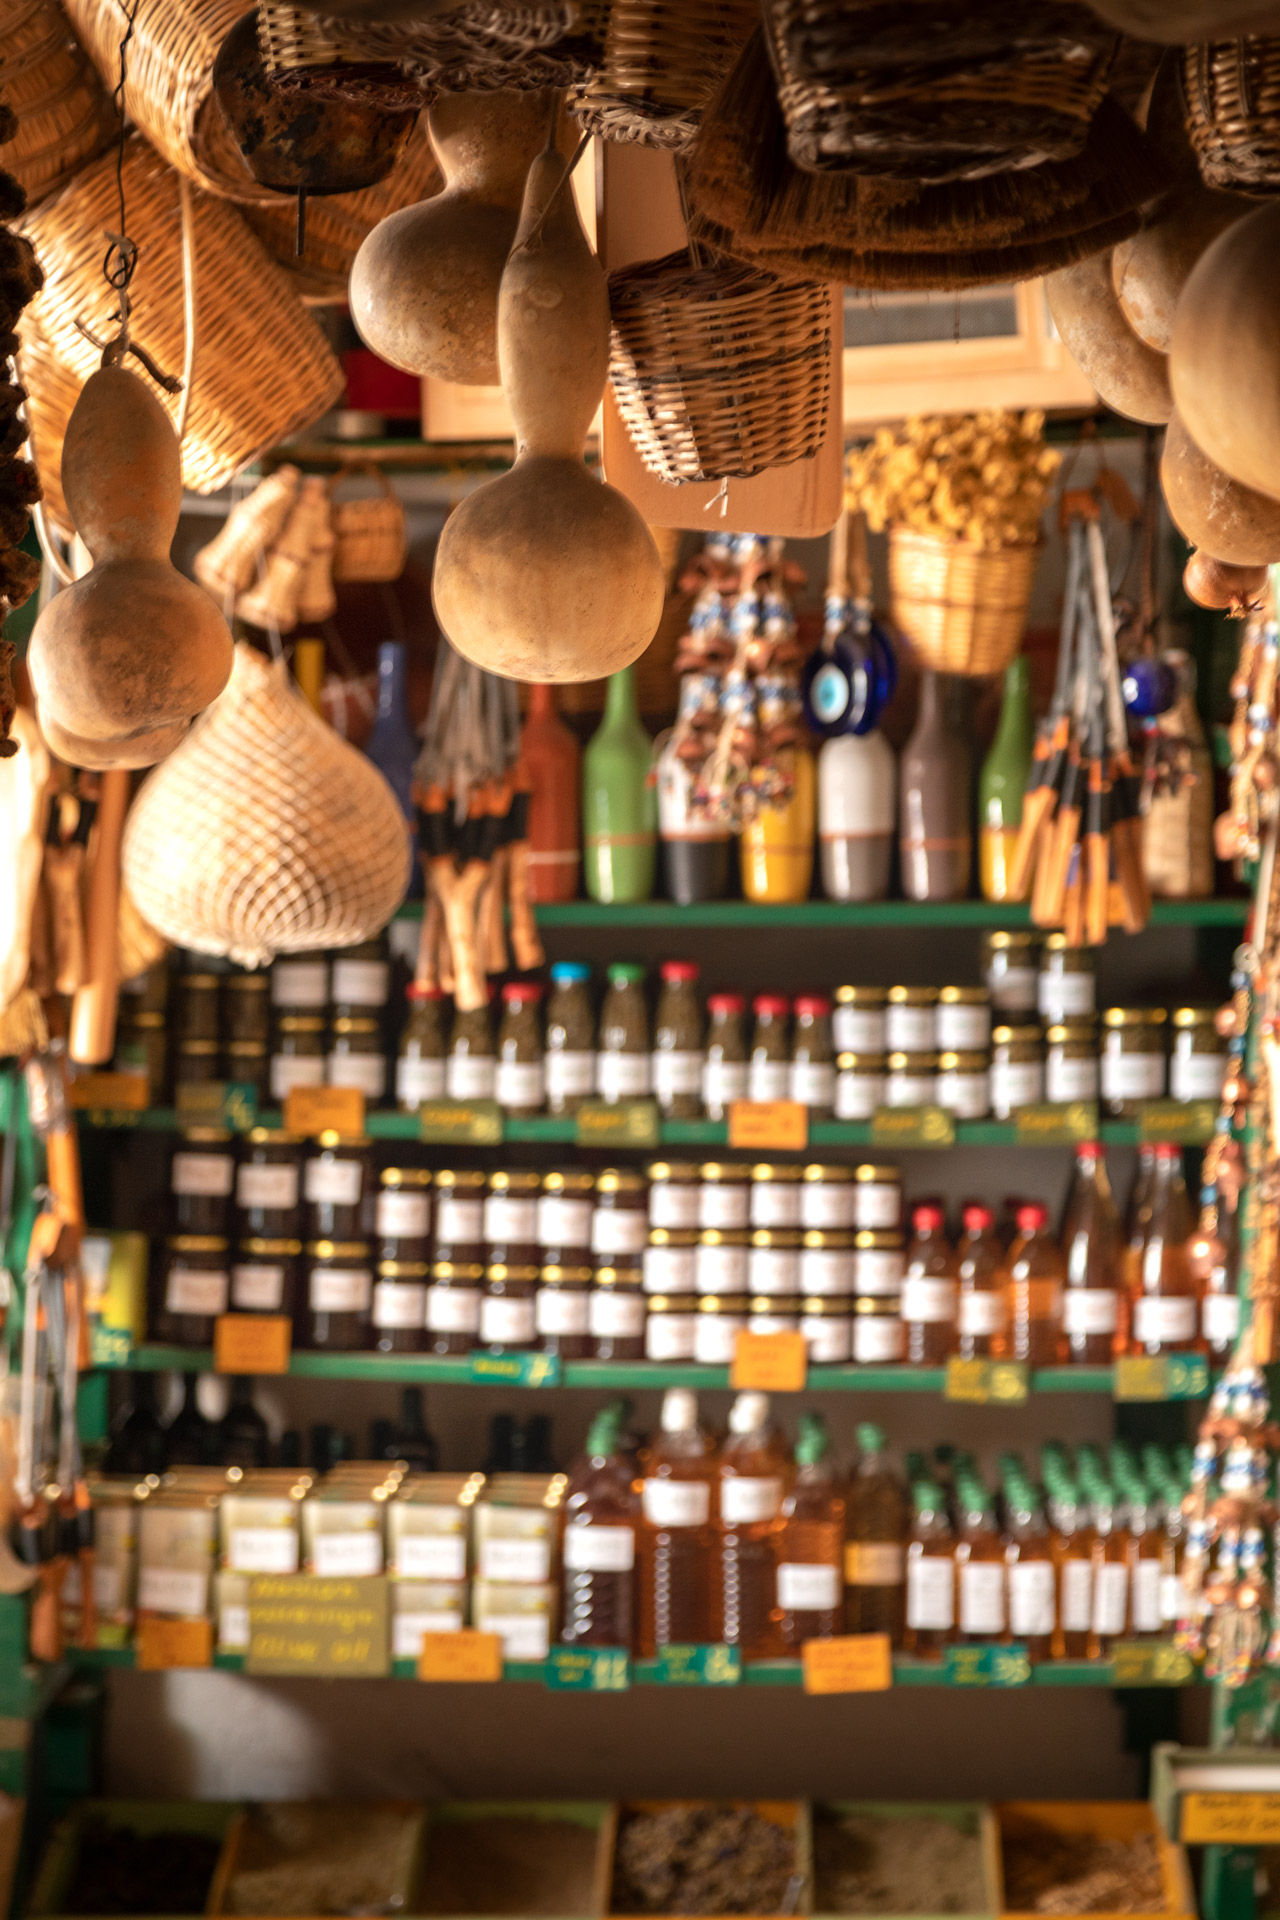 Excellent quality local products can be found everywhere in the town of Hora